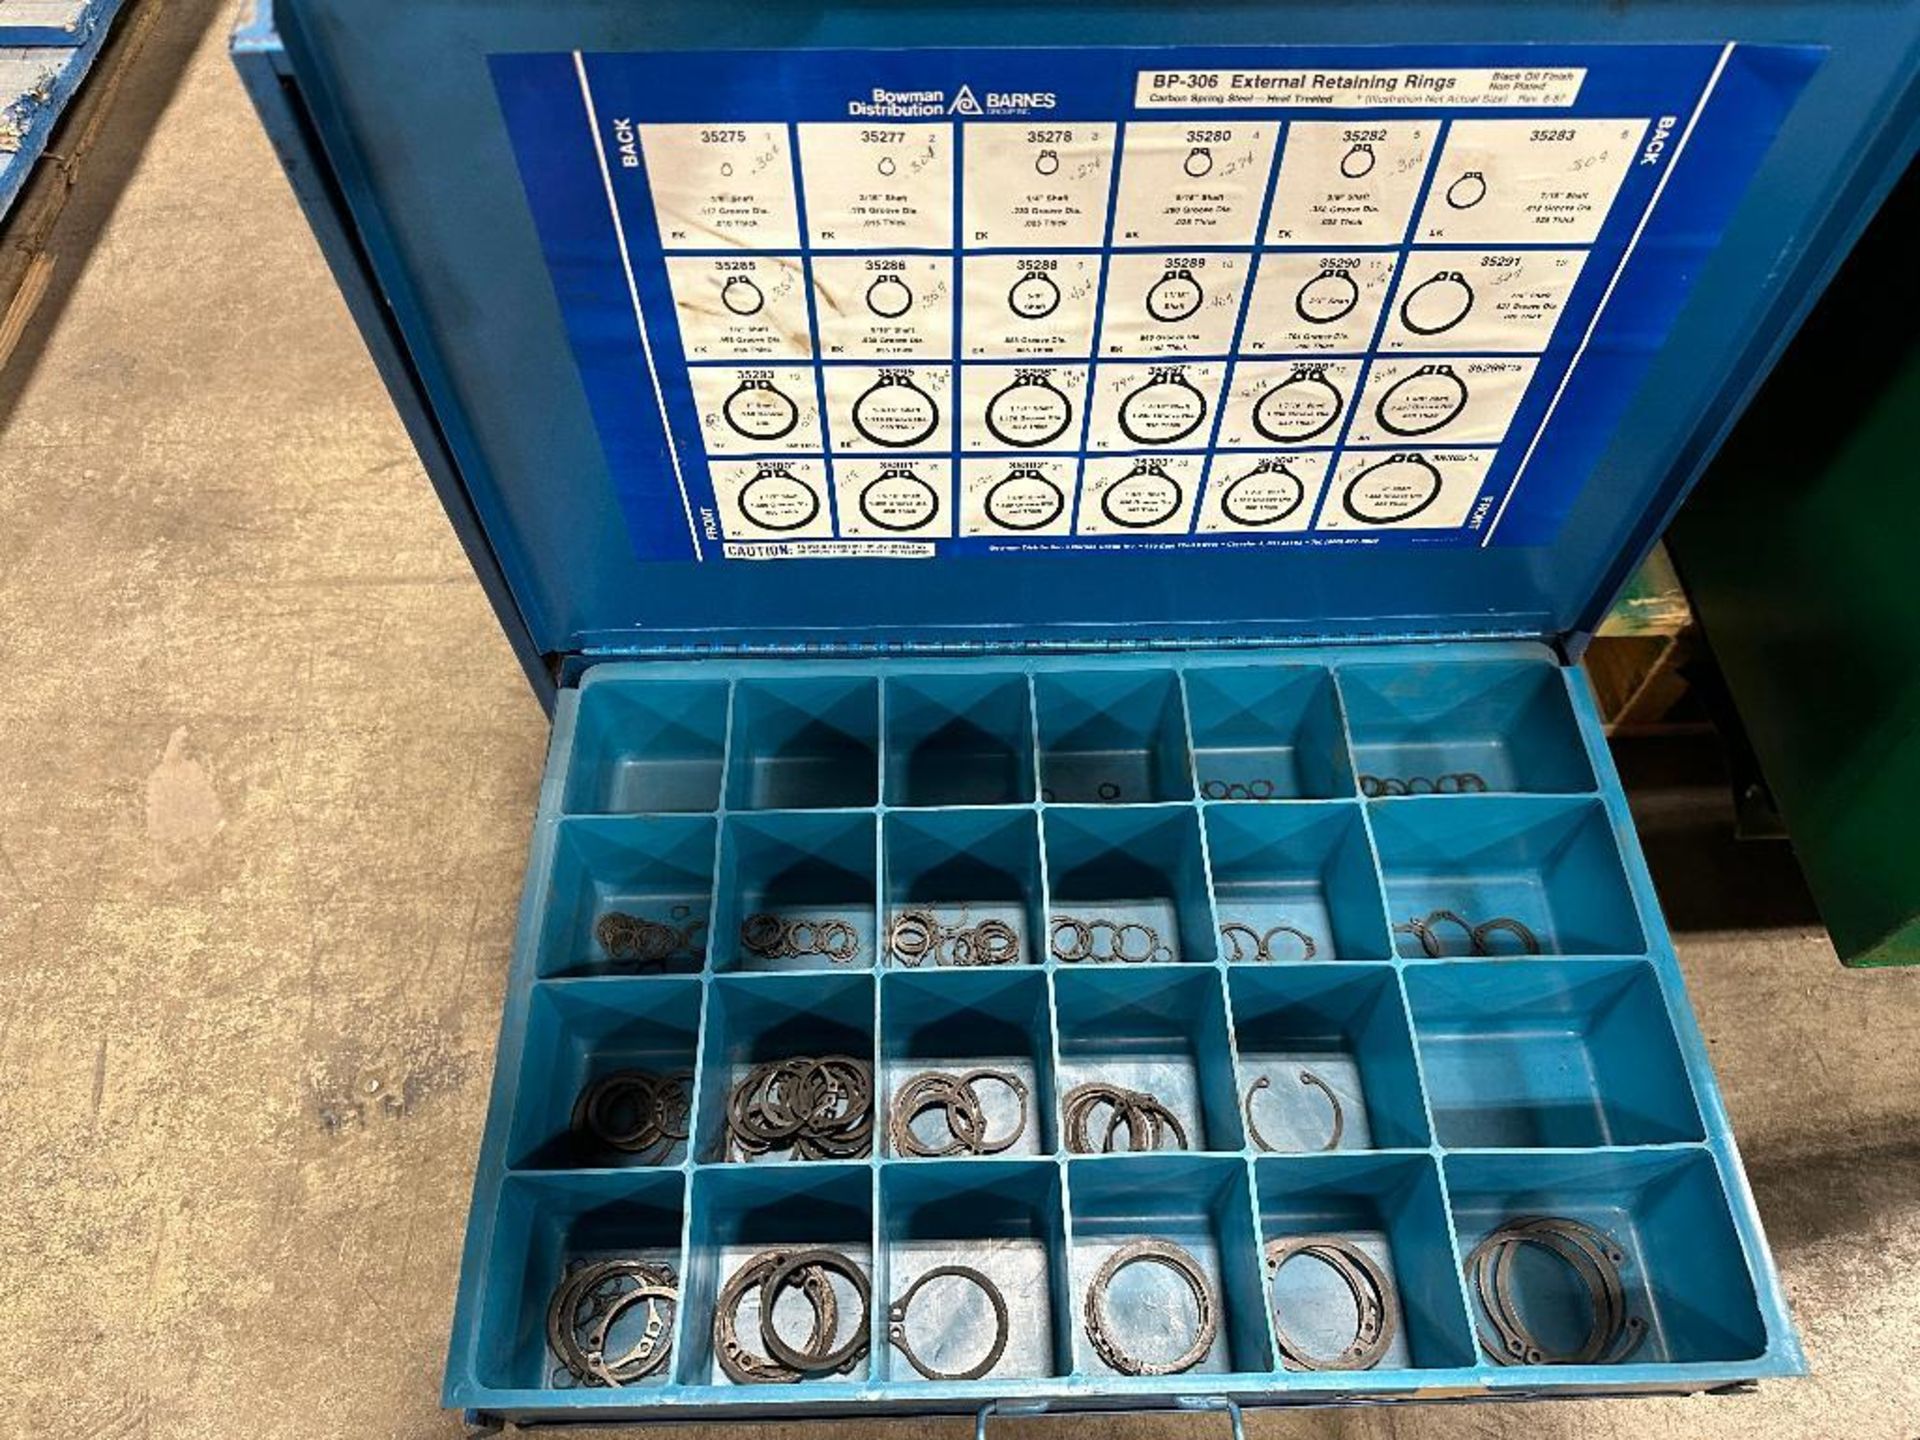 4-Drawer Parts Bin w/ Asst. Screws and Retaining Rings - Image 6 of 6